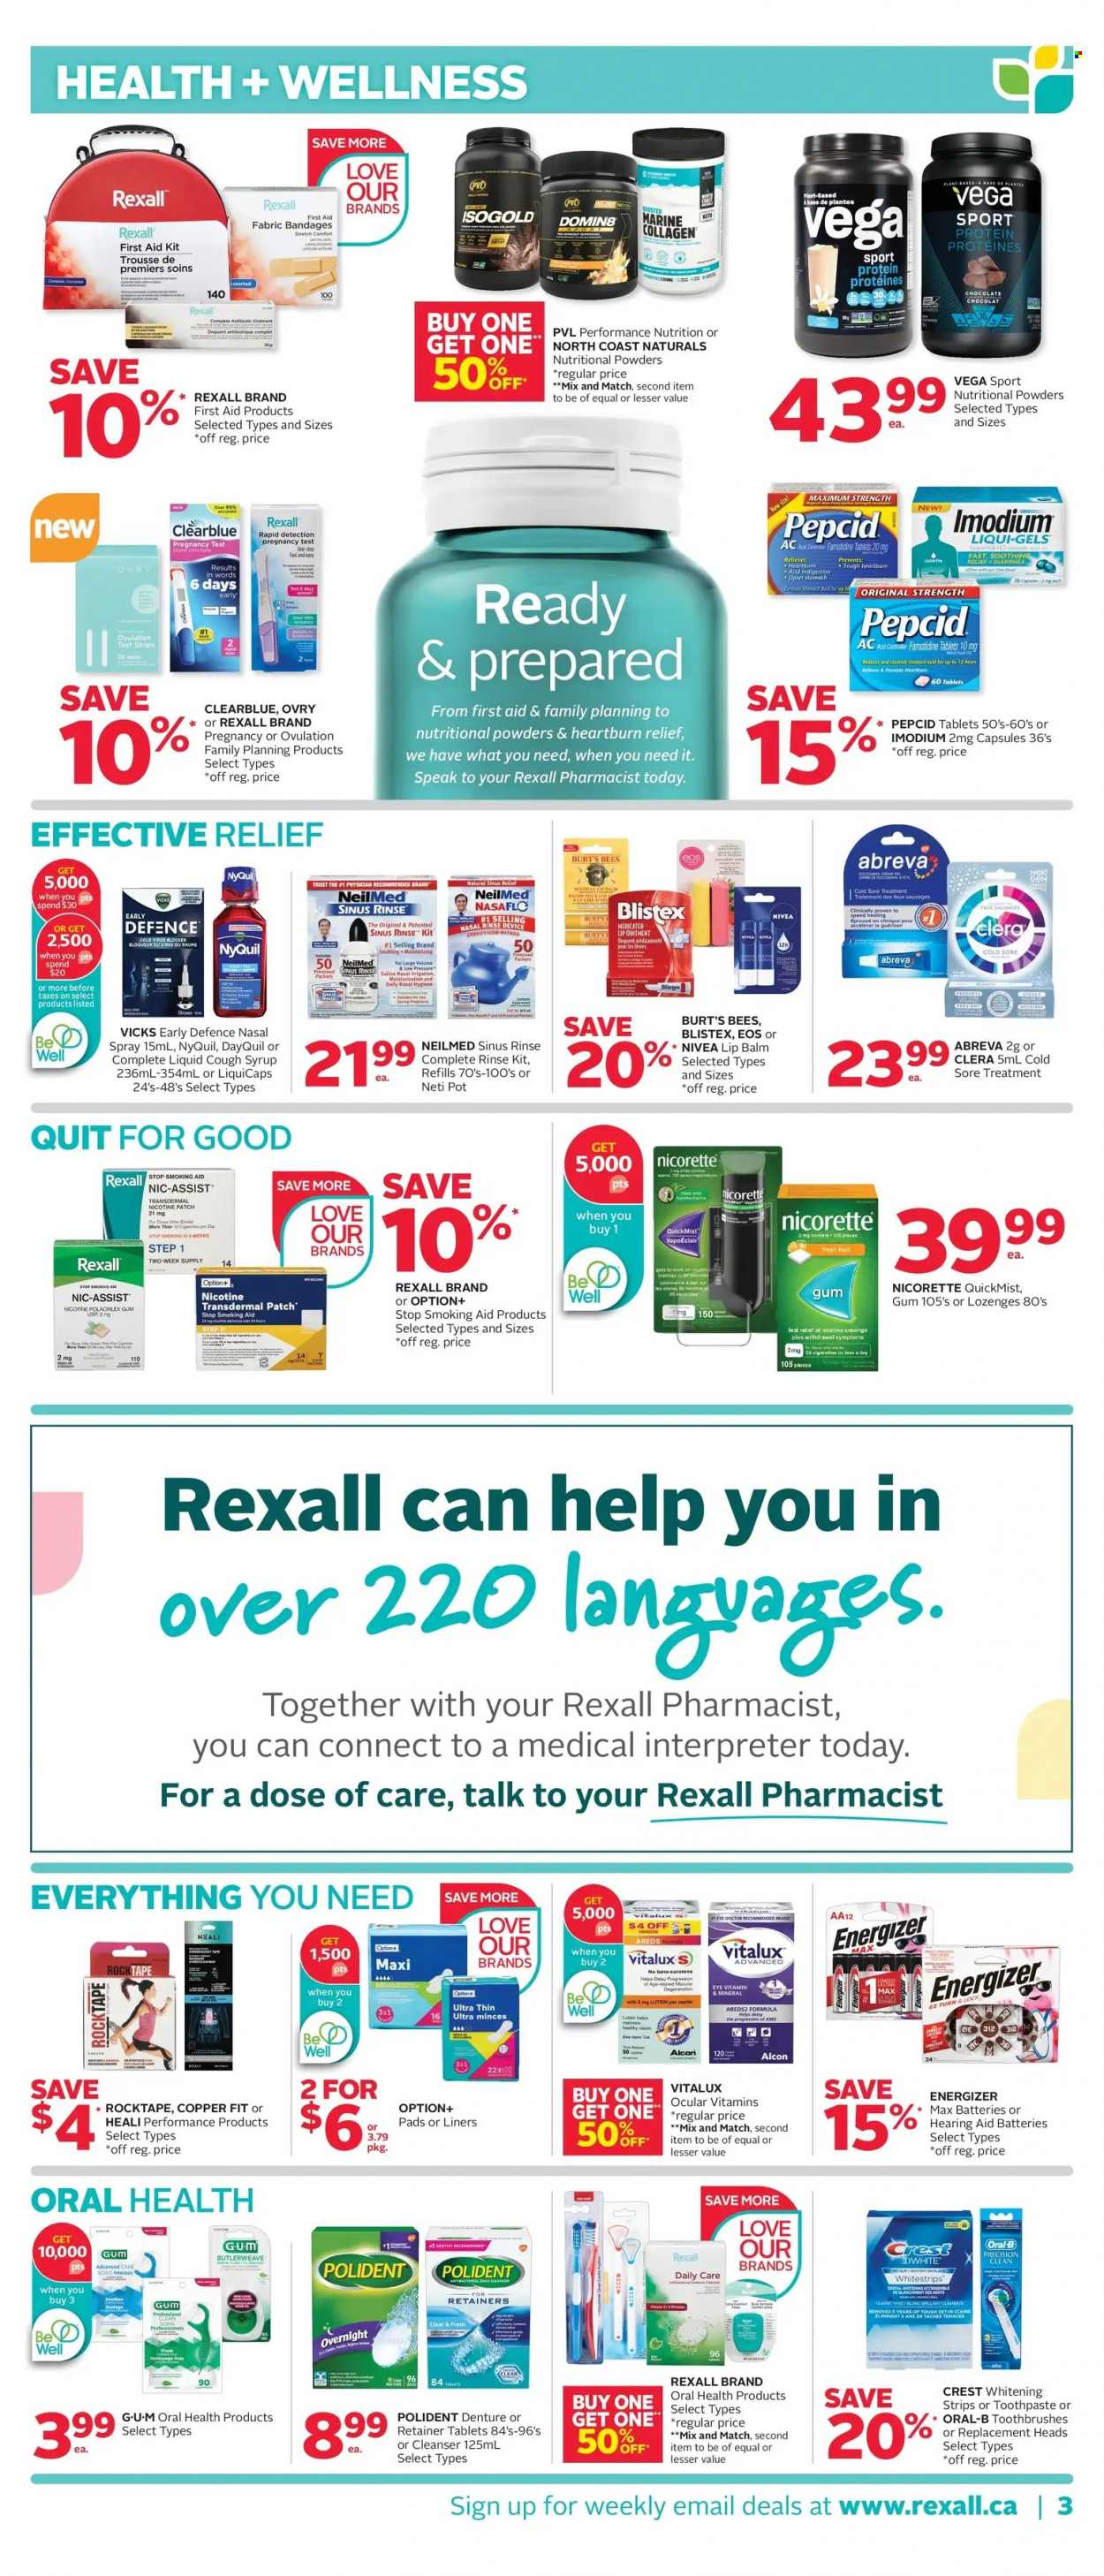 thumbnail - Rexall Flyer - March 17, 2023 - March 23, 2023 - Sales products - chocolate, syrup, Nivea, ointment, toothpaste, Polident, Crest, sanitary pads, Abreva, cleanser, Clinique, lip balm, Vicks, pot, battery, DayQuil, Nicorette, Pepcid, NyQuil, nasal spray, first aid kit, pregnancy test, Energizer, Imodium, Oral-B. Page 3.